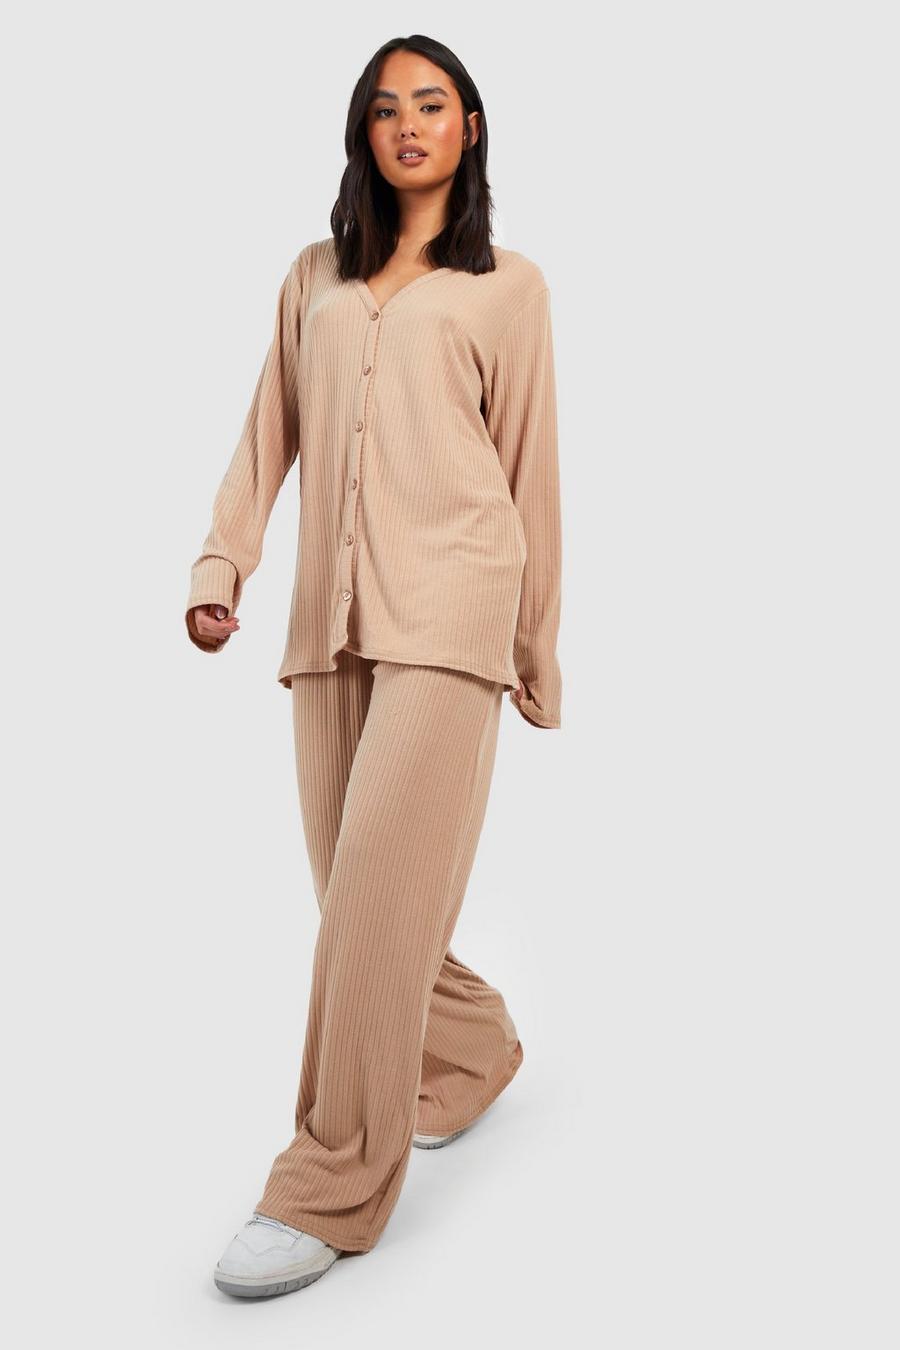 Camel beige Soft Rib Knit Cardigan And Trouser Relaxed Co-ord